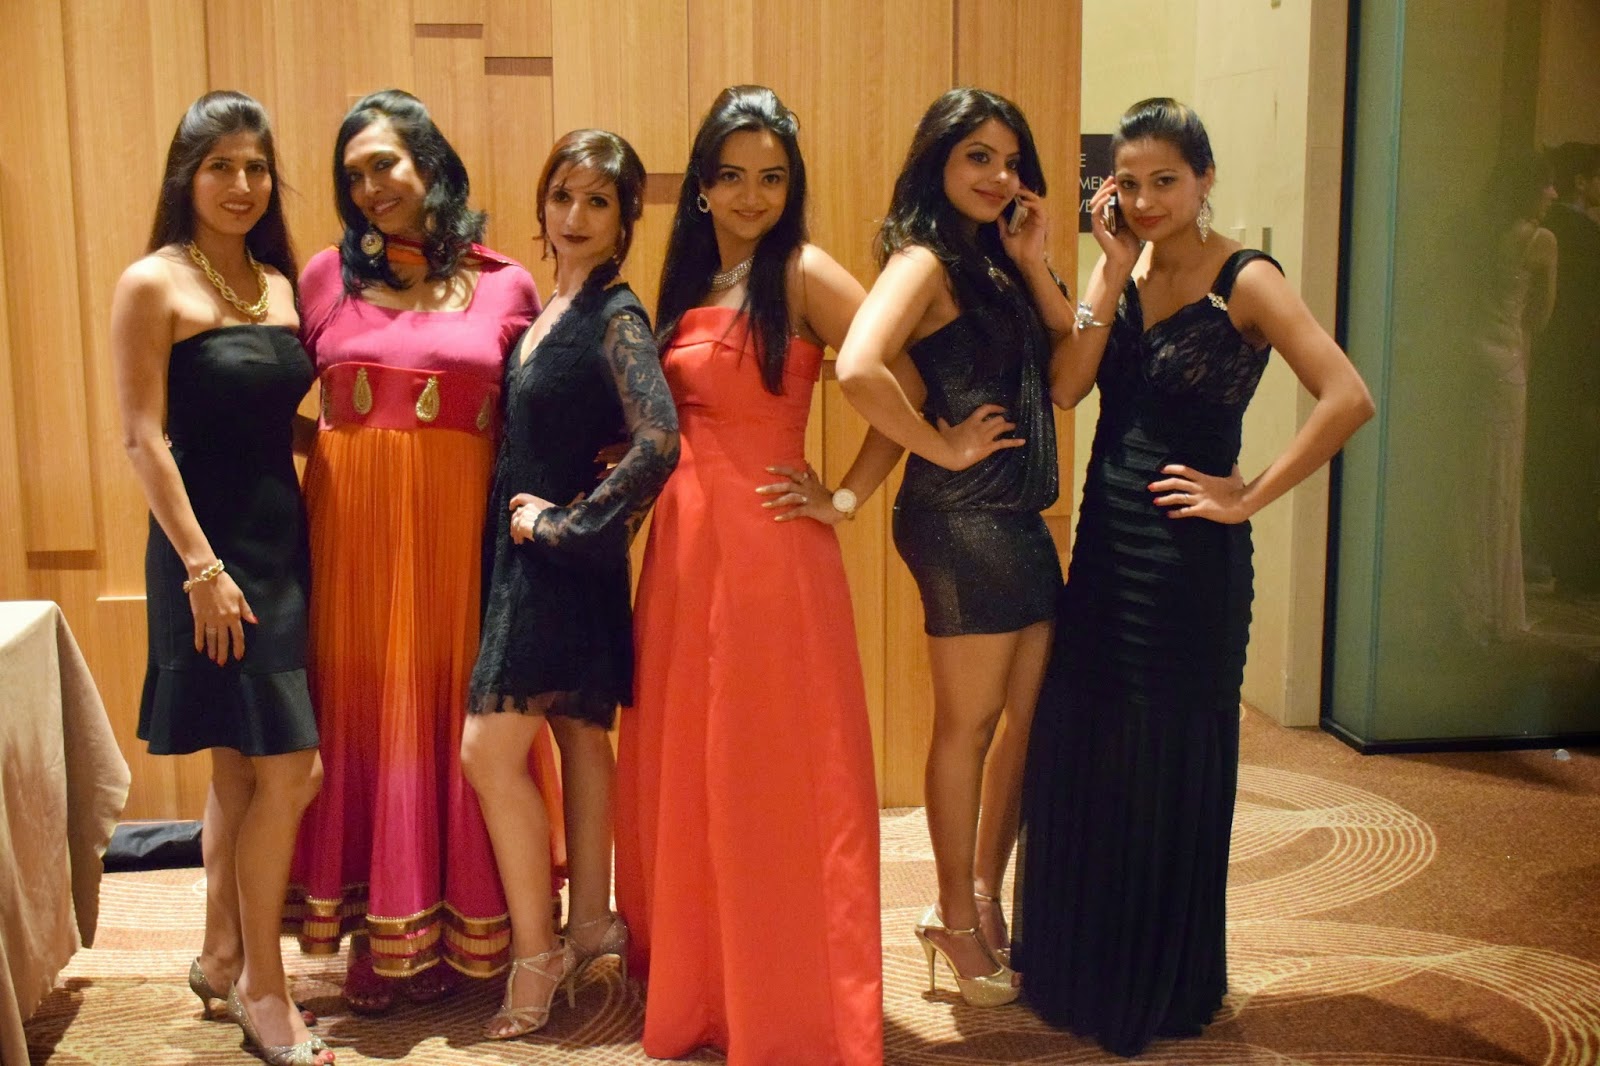 Seattle fashion shows, Seattle desi events, Hyatt Fashion show, fashion trends for women of all ages, Ananya in a gown, Seattle Fashion Blogger, Indian ladies wearing different attire, Indo-Western Fusion